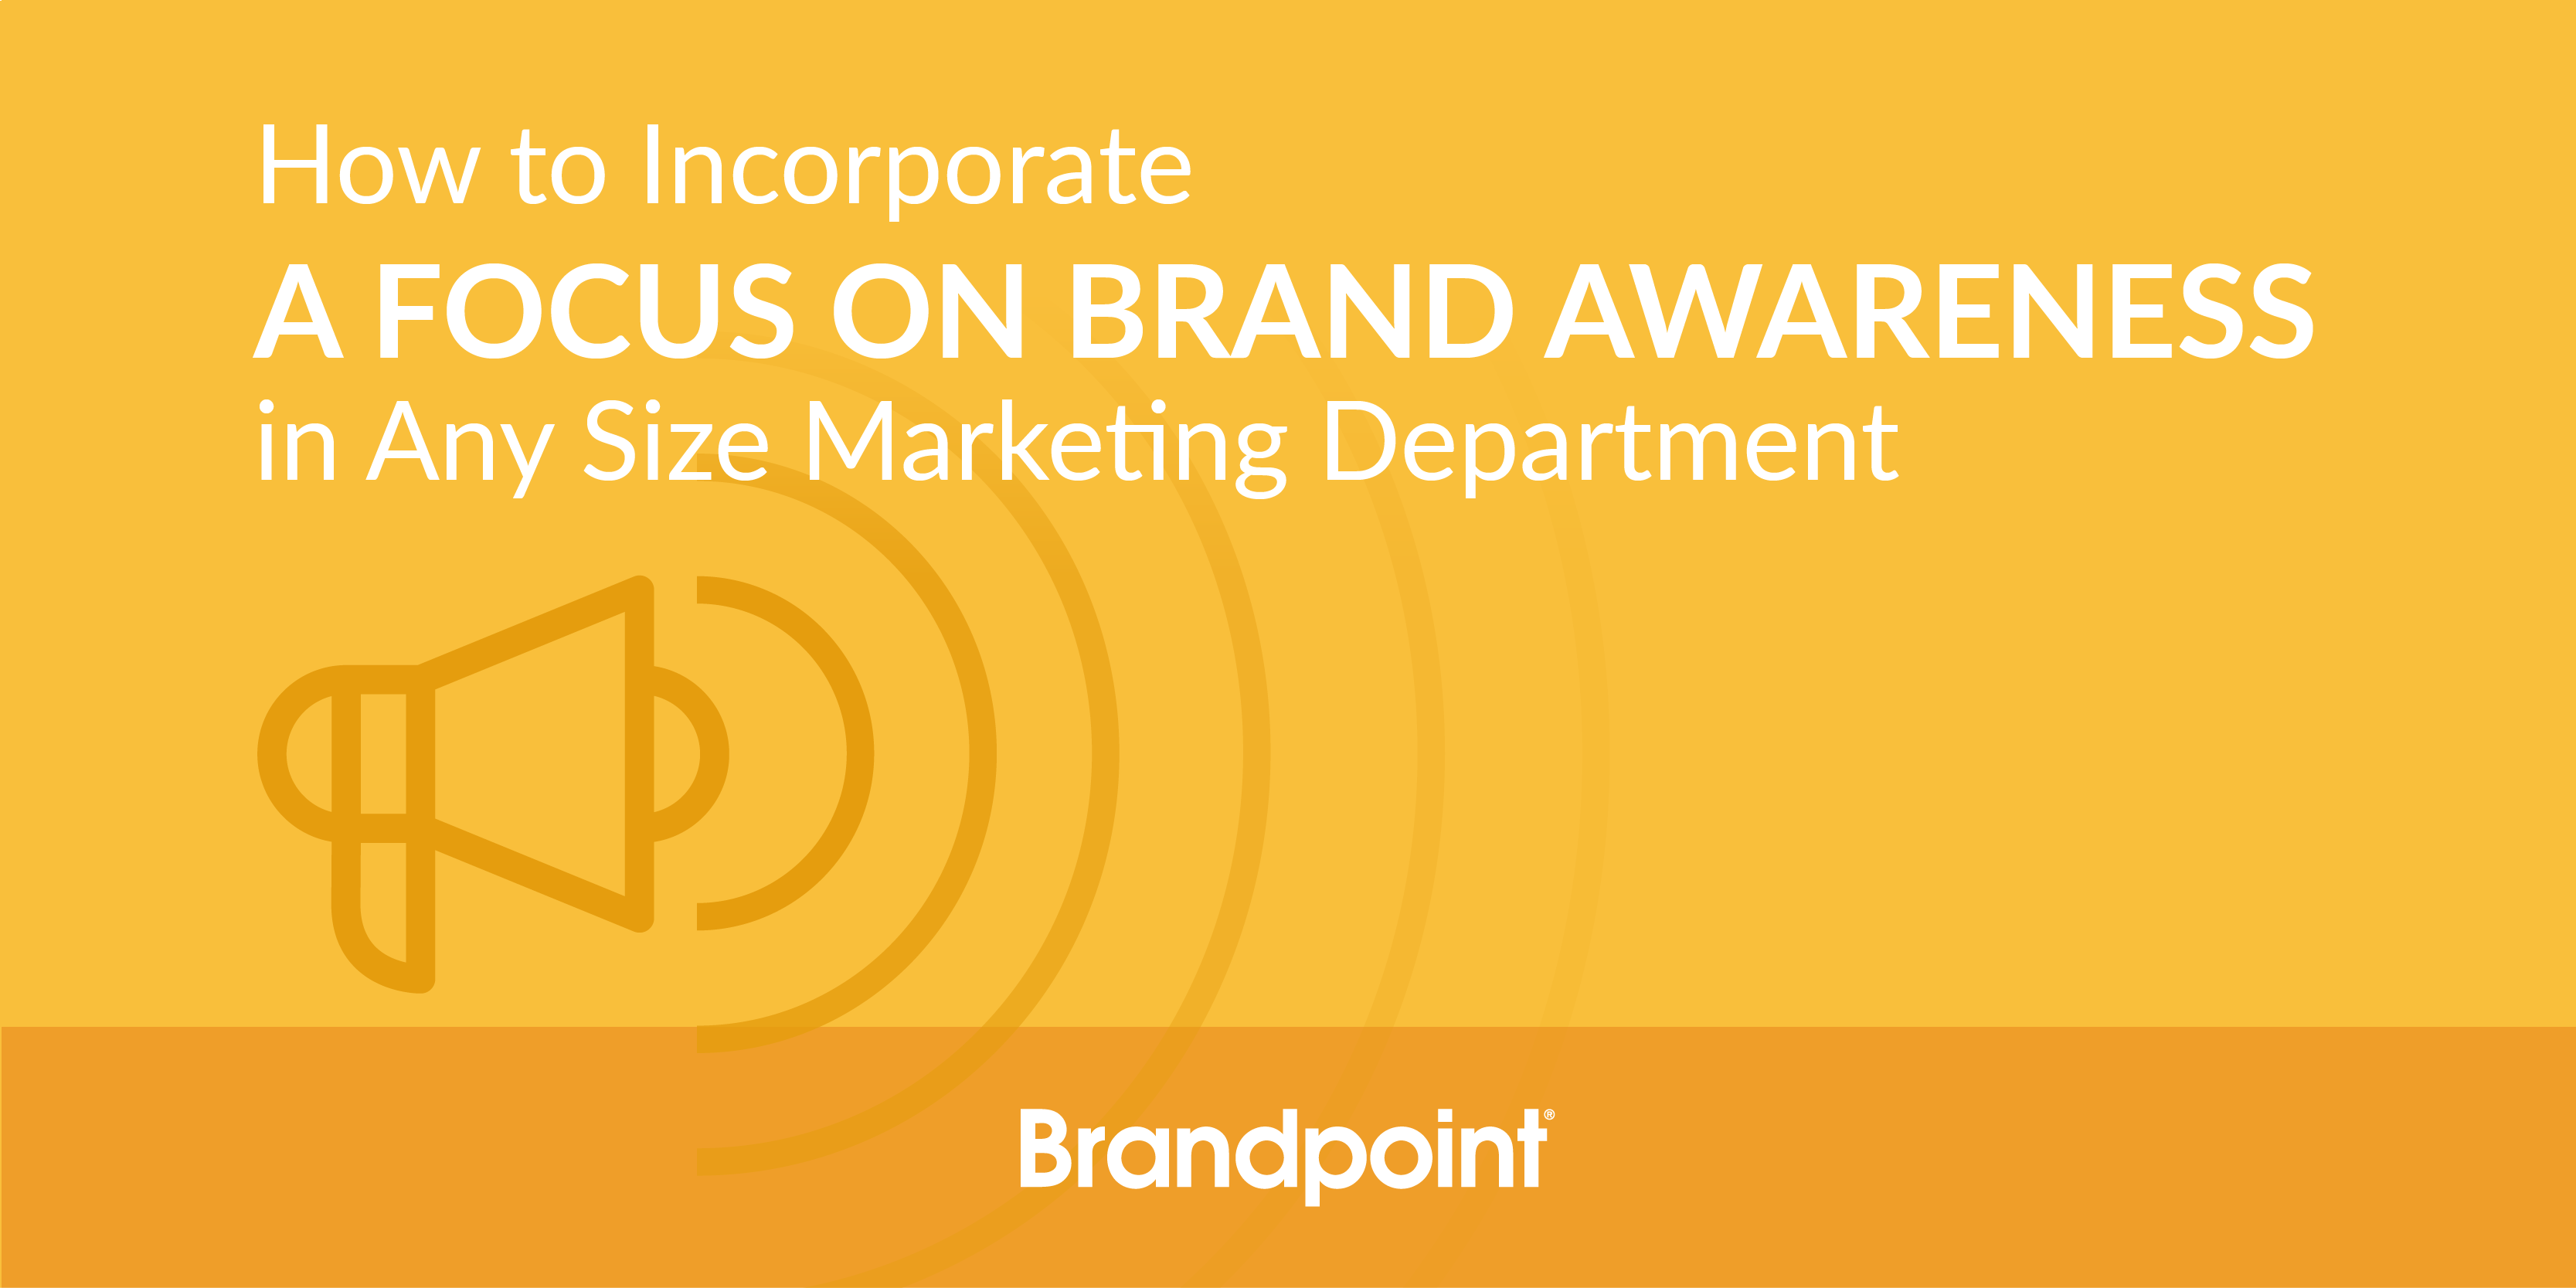 BPT-How to incorporate a focus on brand awareness in any size marketing department-01